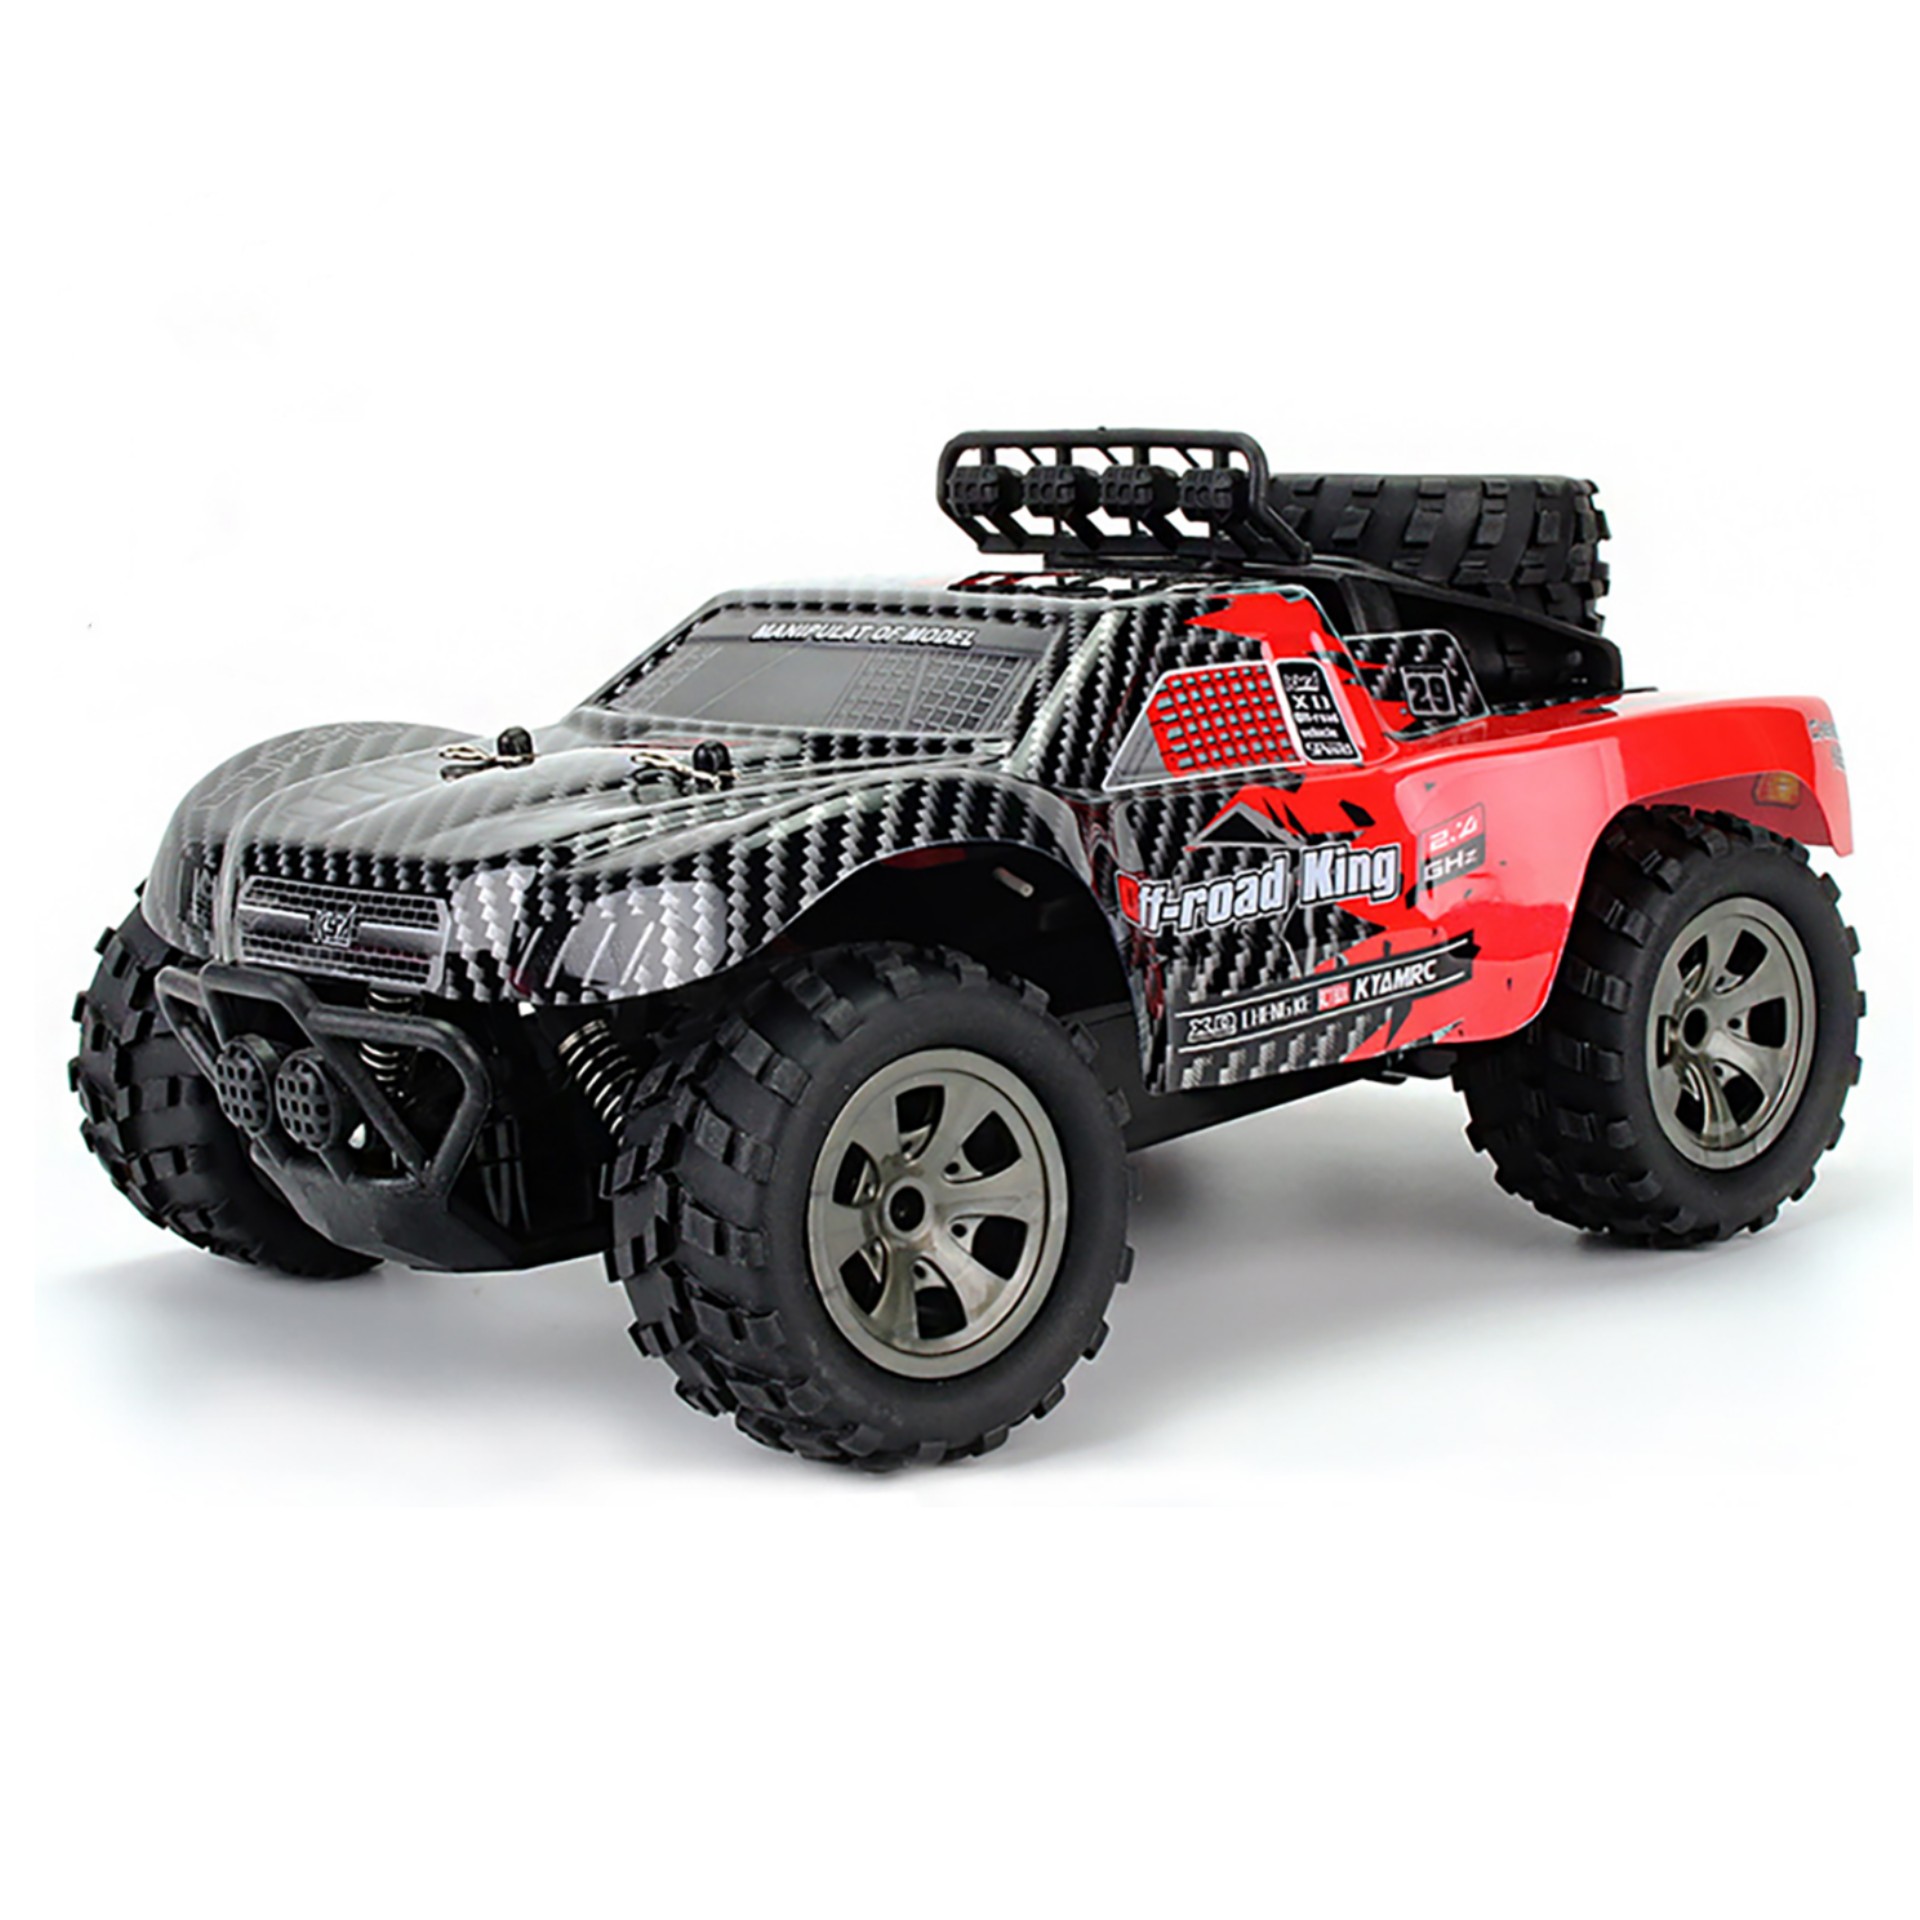 KYAMRC 1:18 RC Car 2.4g High-Speed Off-Road Remote Control Vehicle Racing Climbing Car Model Toys